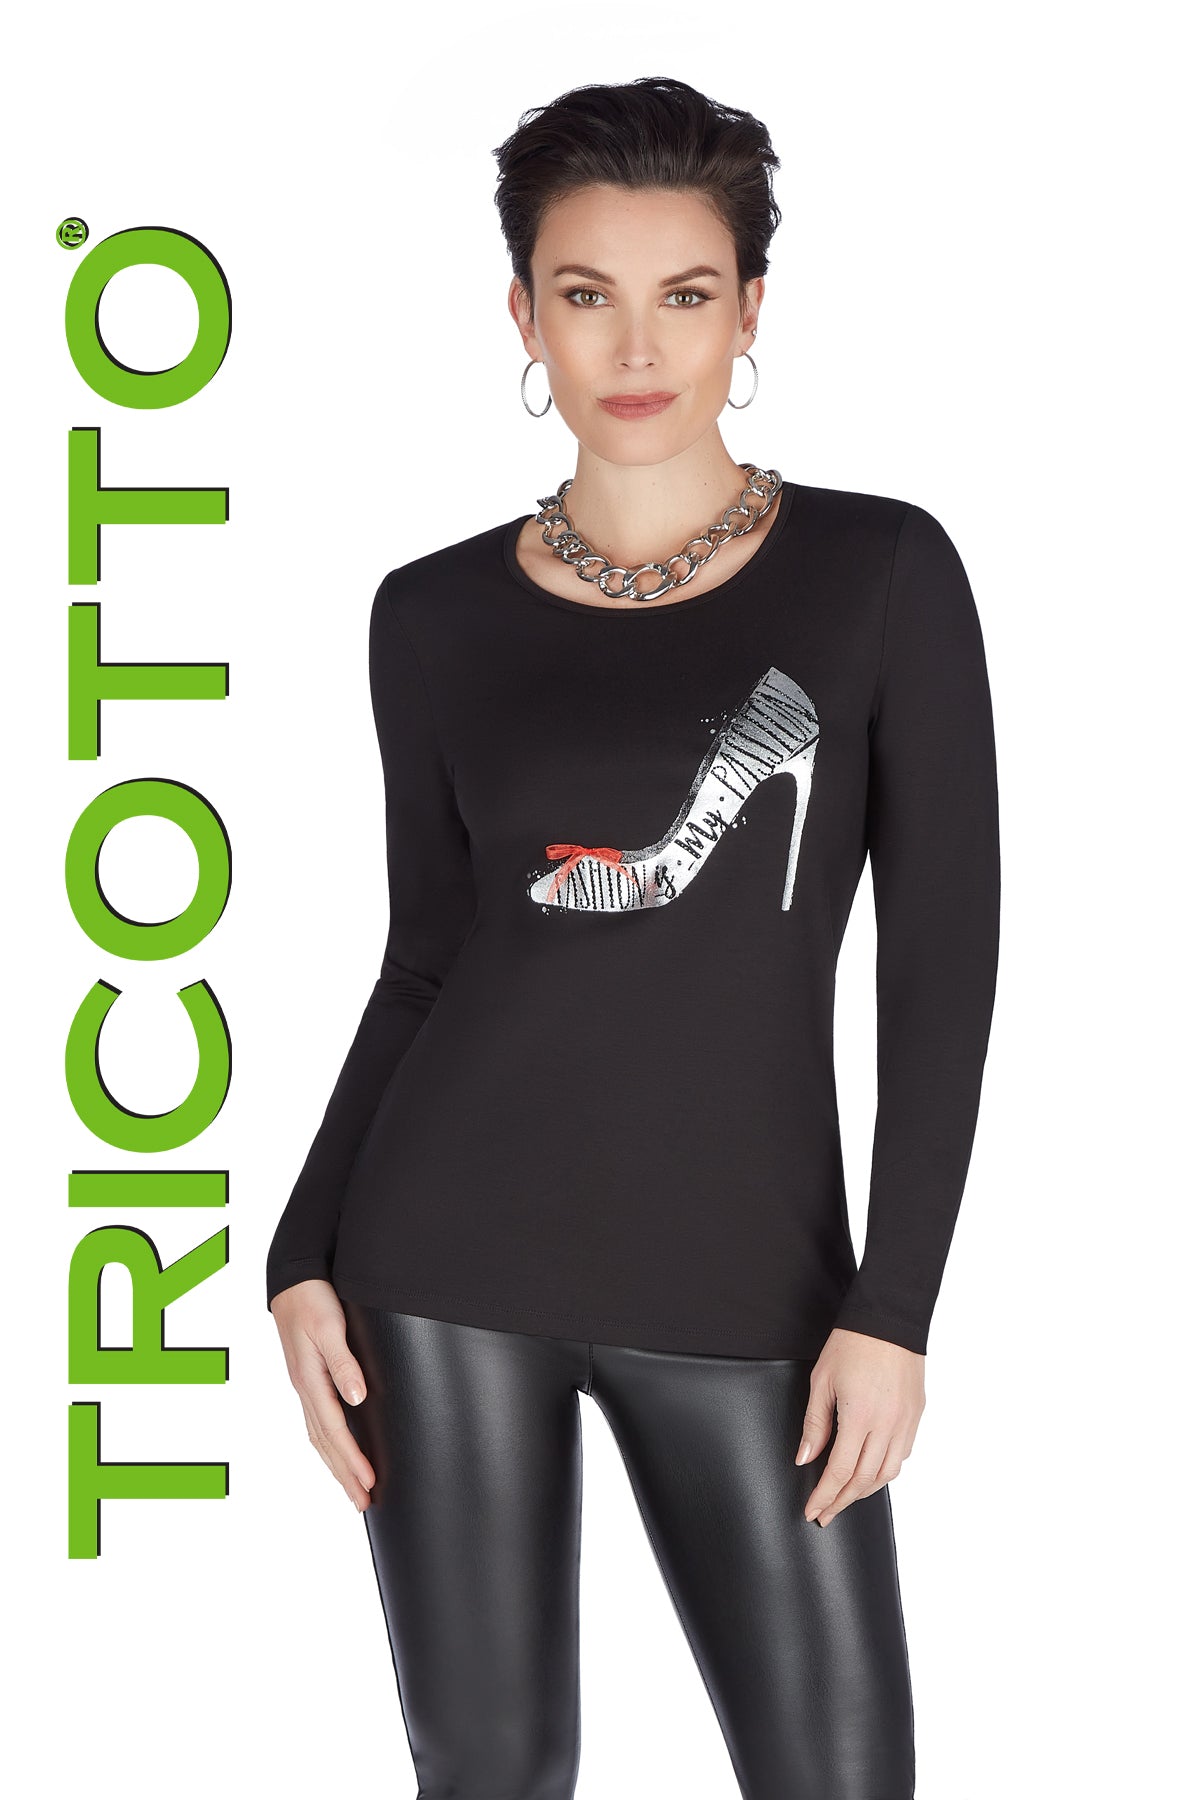 Tricotto T-shirts-Buy Tricotto T-shirts Online-Tricotto Online Shop